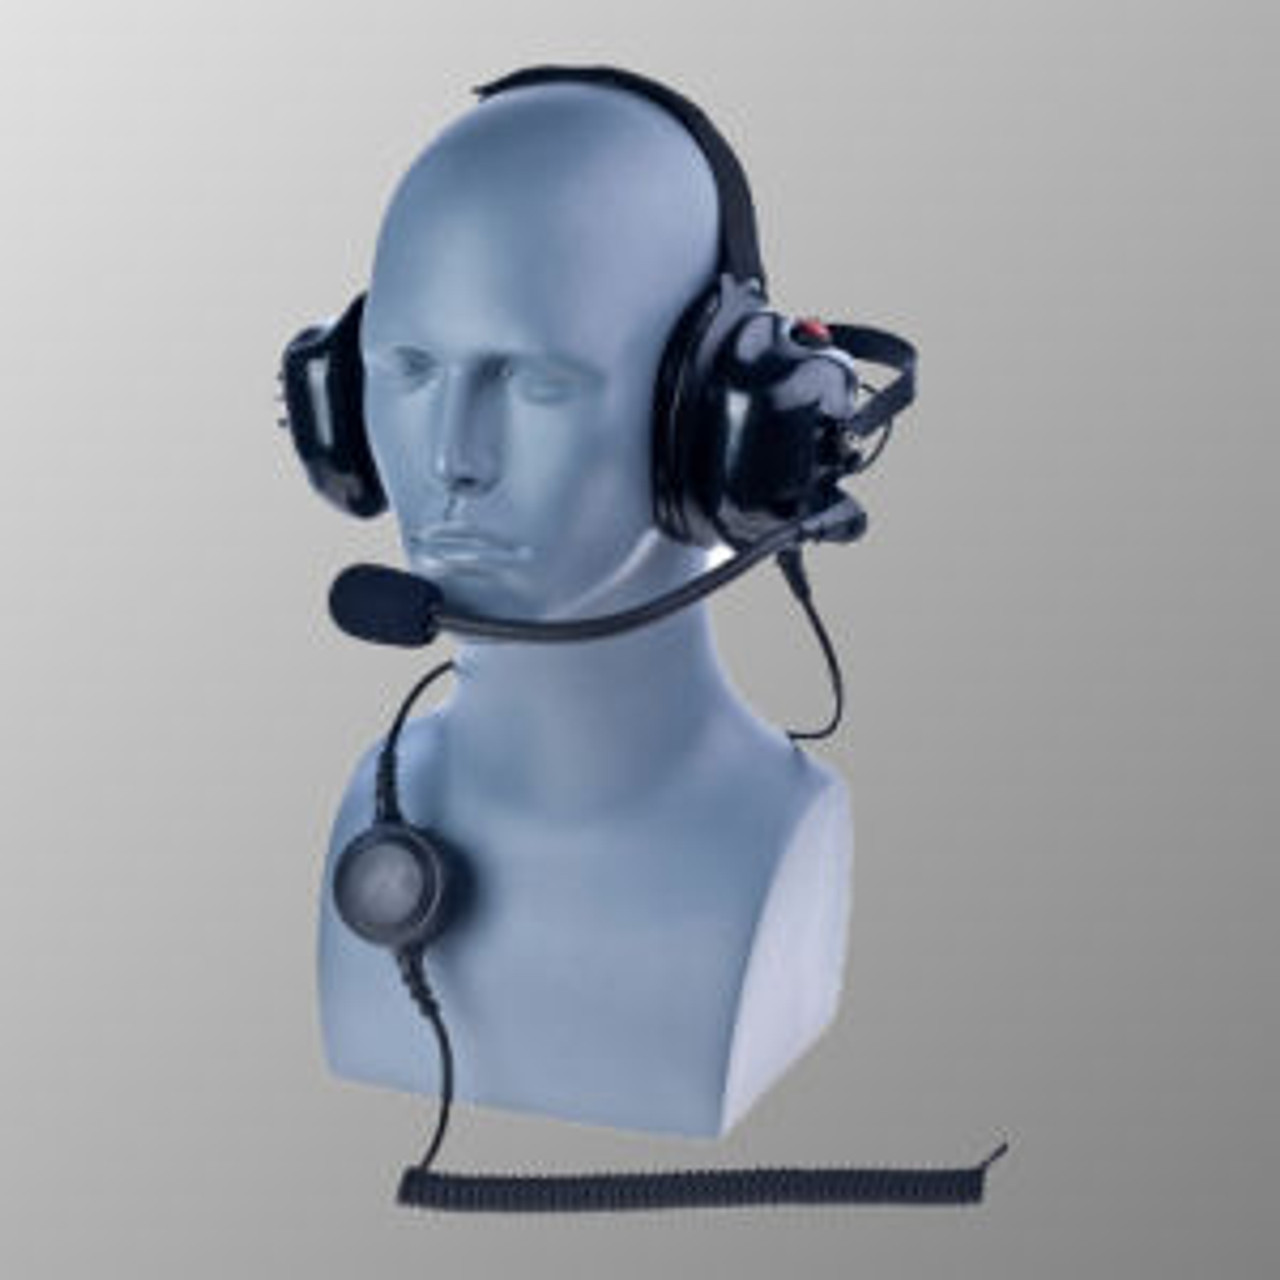 Motorola CT150 Noise Canceling Behind The Head Double Muff Headset